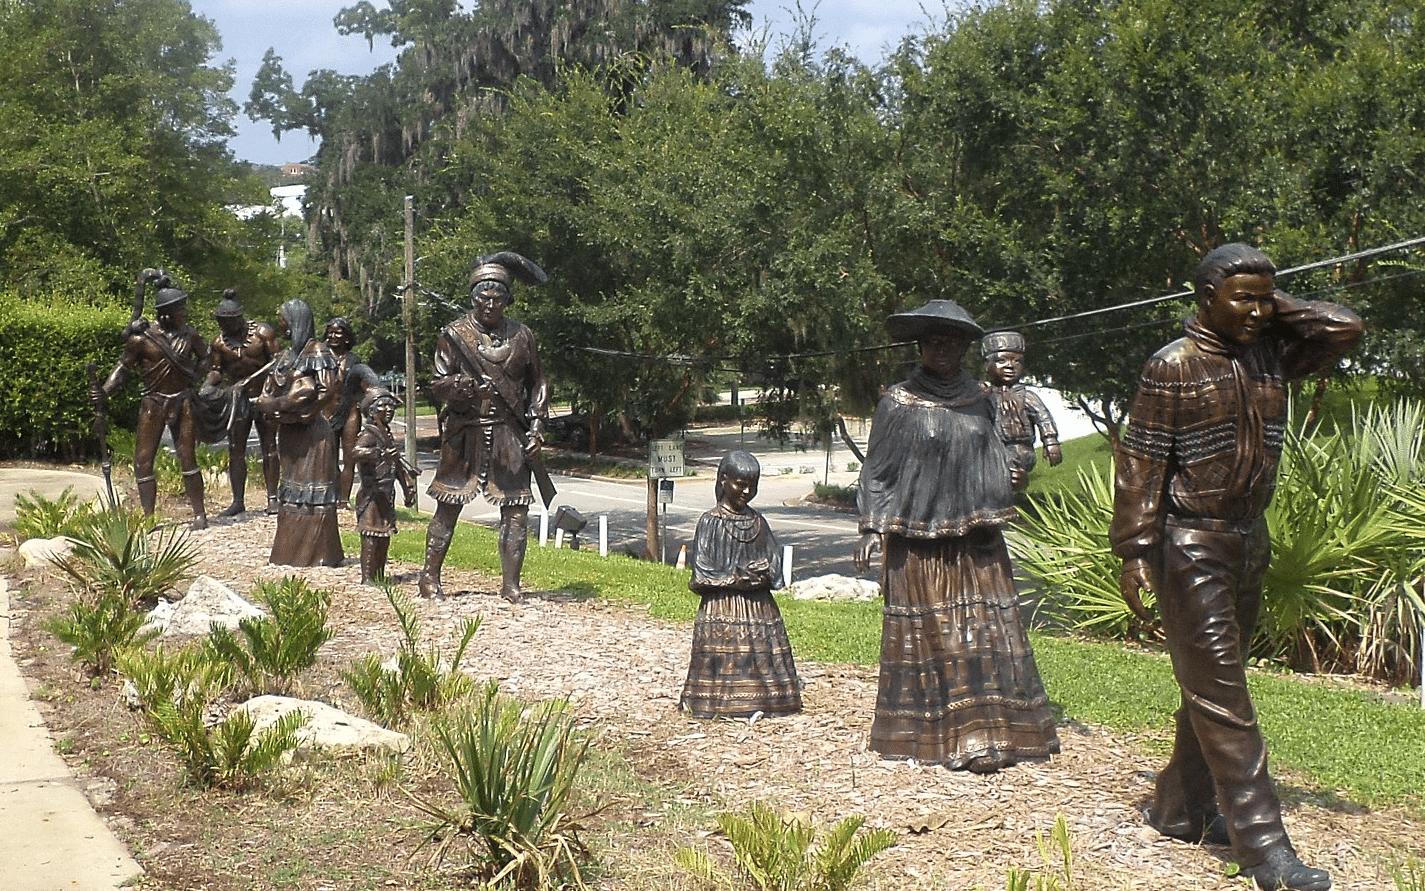 Statues of Native Americans walking, representing the Trail of Tears, in Florida